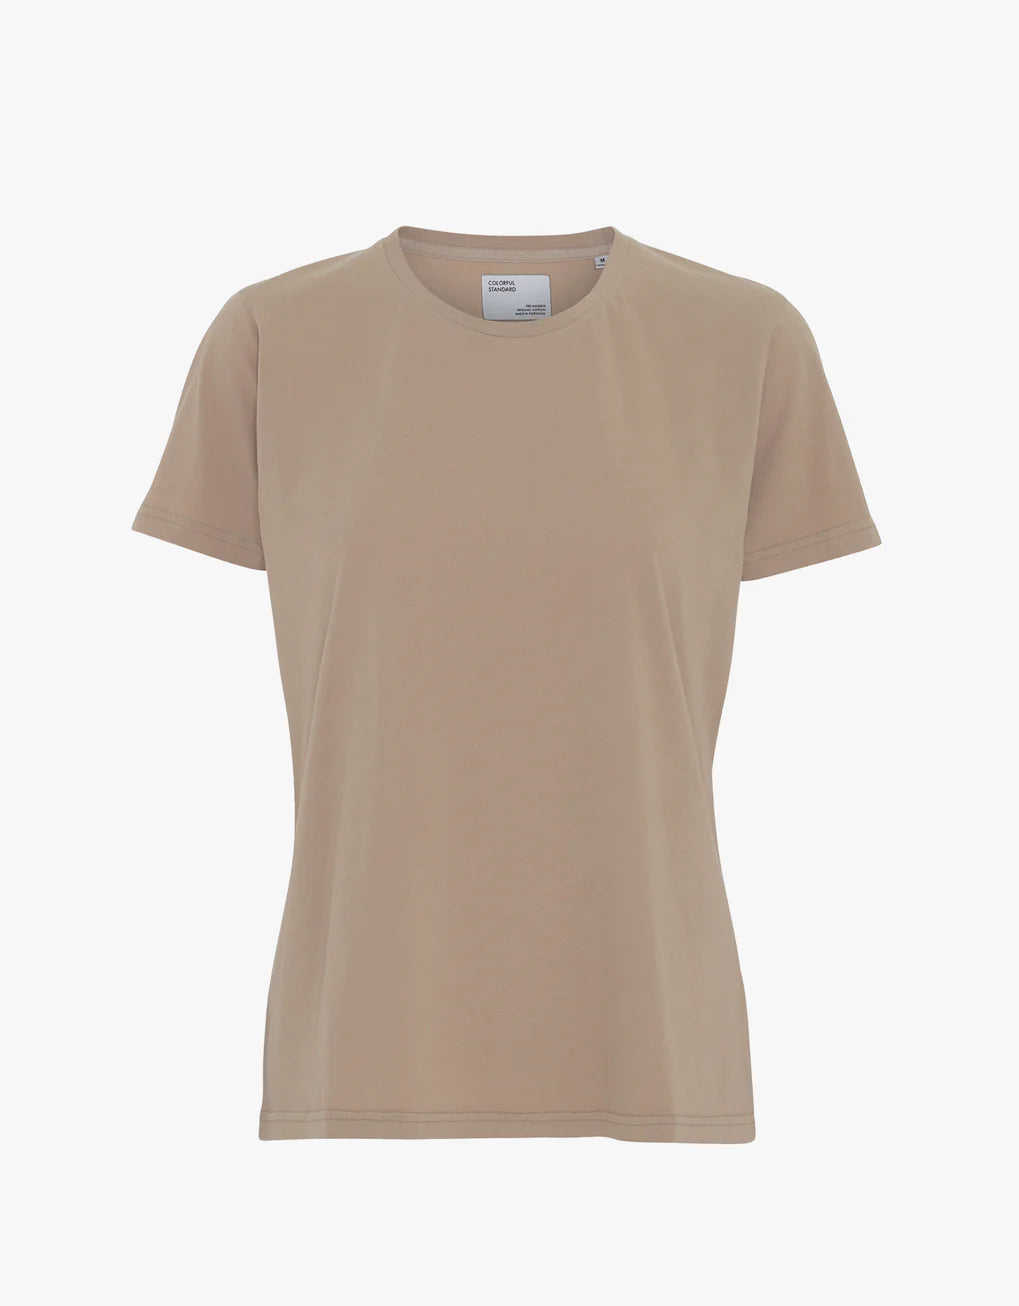 A Colorful Standard Light Organic Tee in beige, machine washable with a round neck.